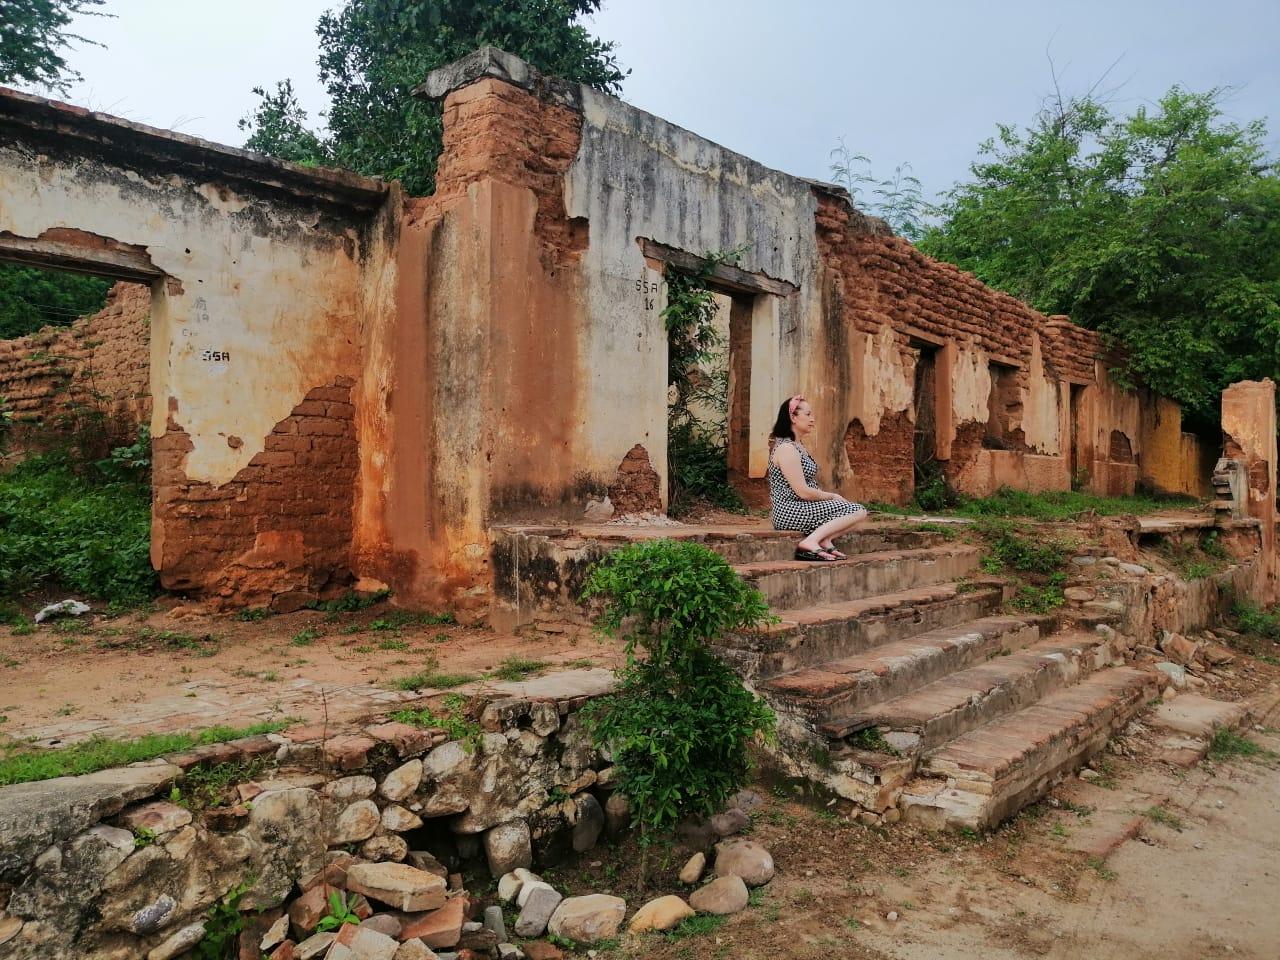 Ajoya remained like a ghost town. The buildings gradually turned into ruins.